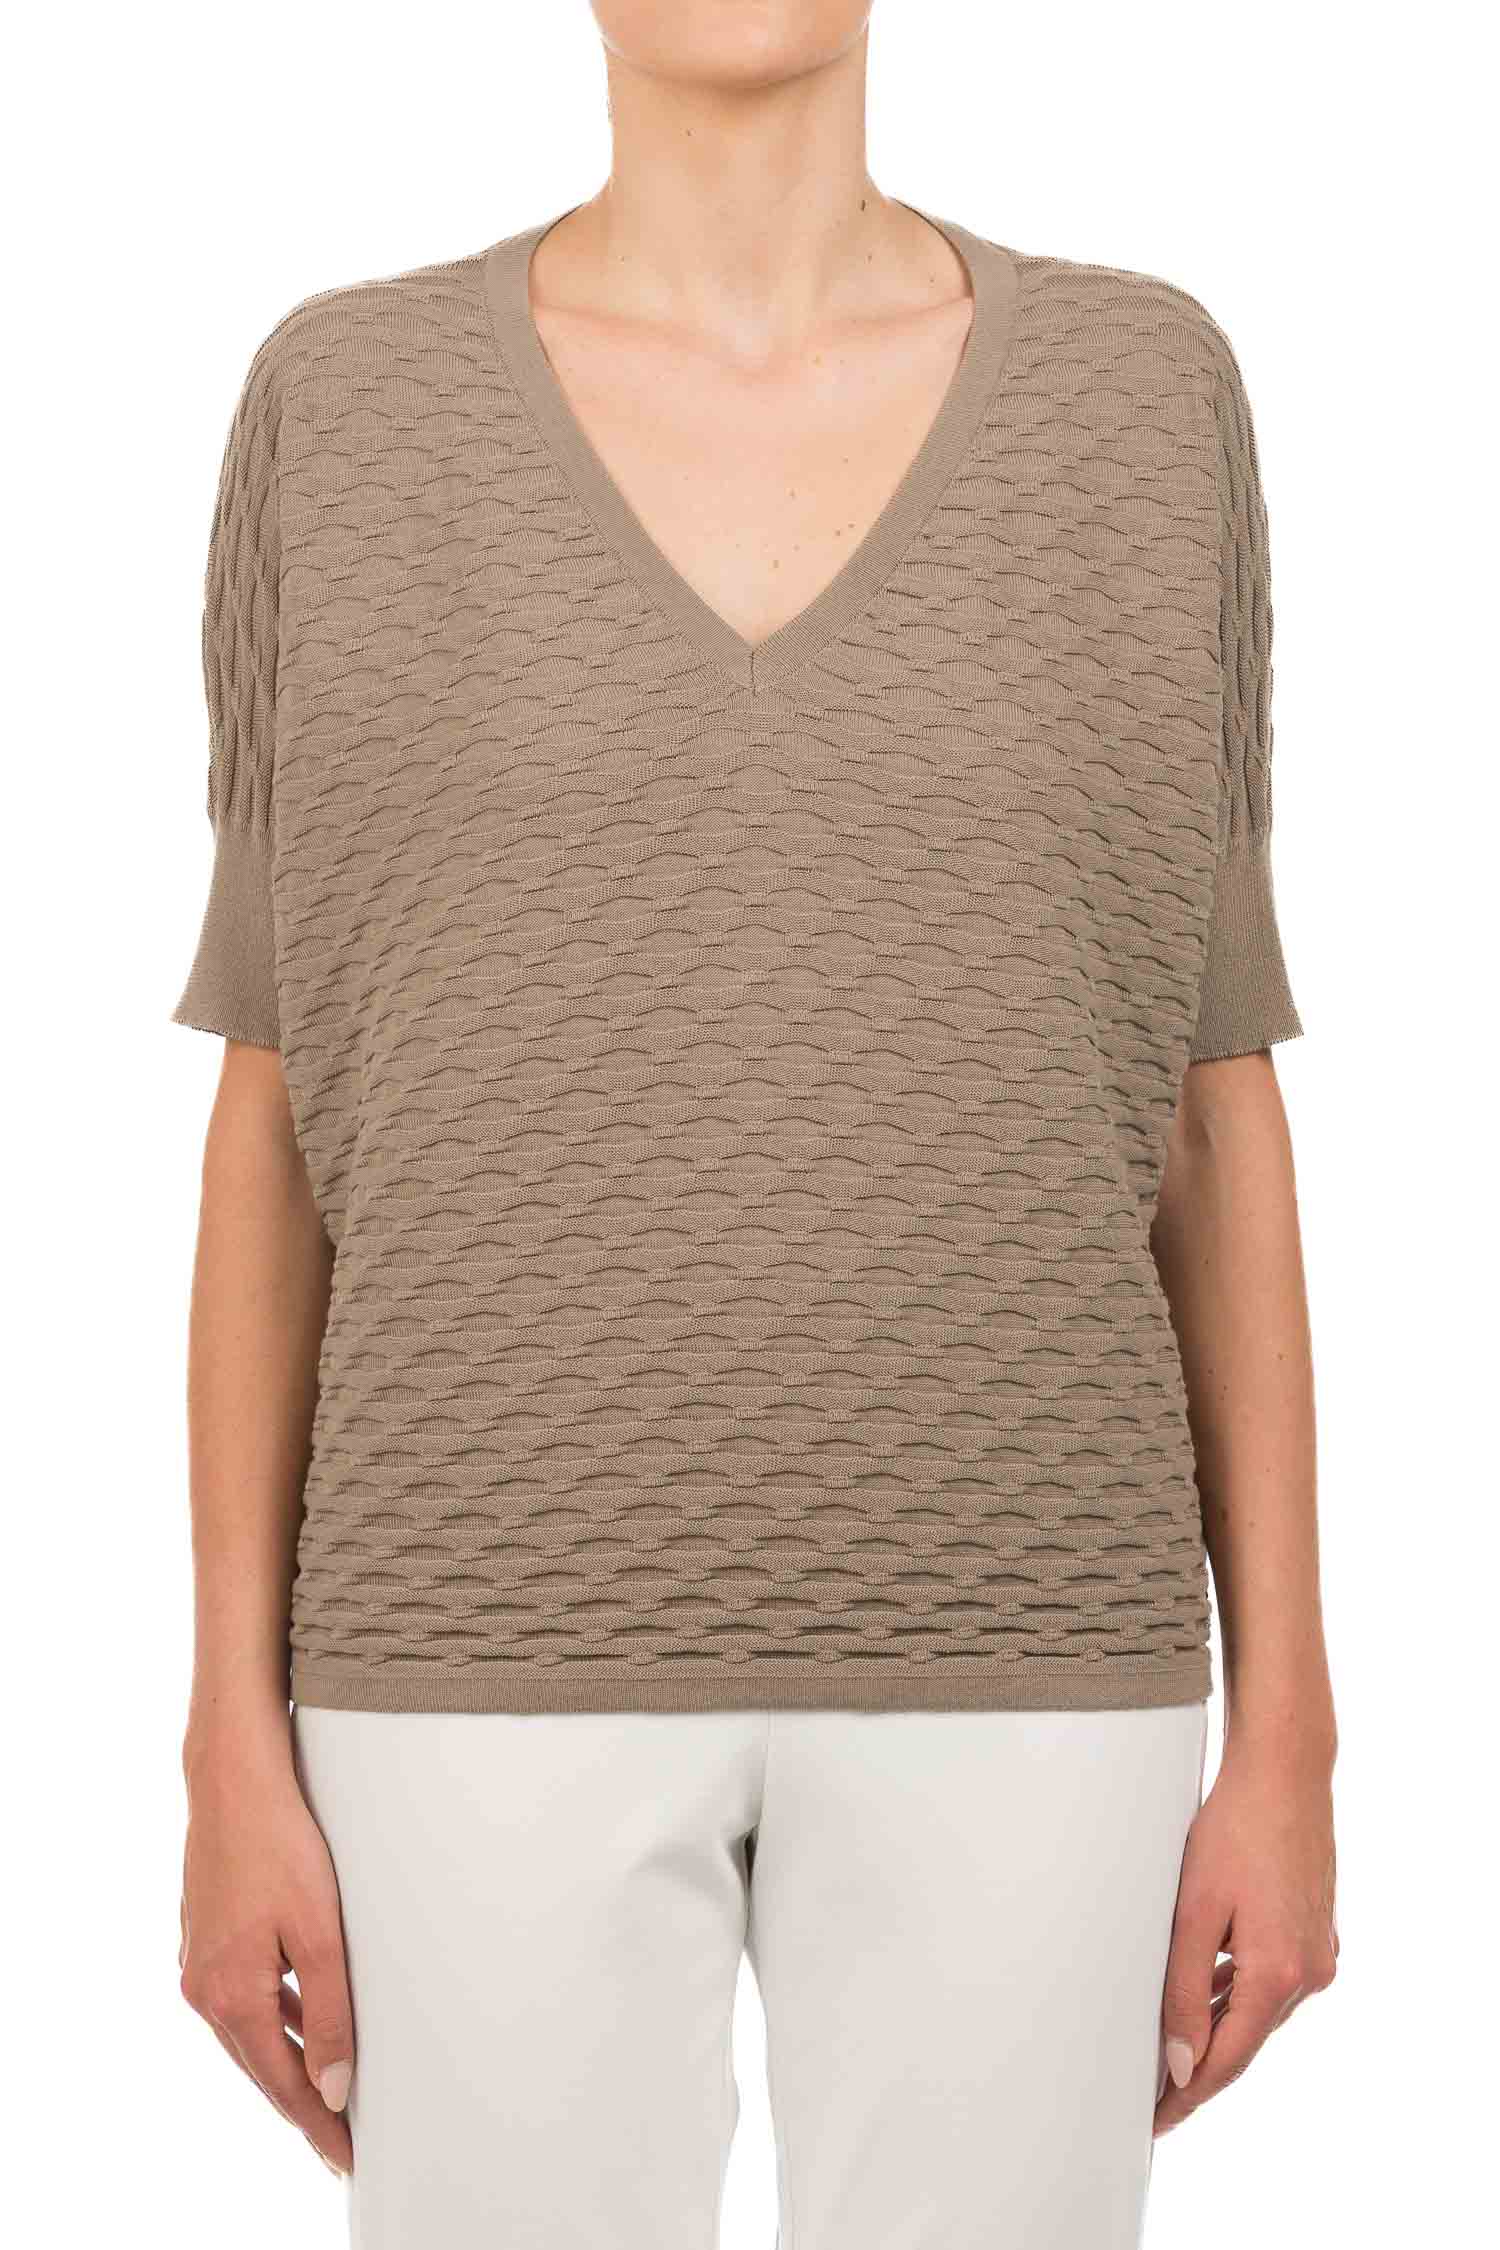 Taupe Textured Pattern Sweater